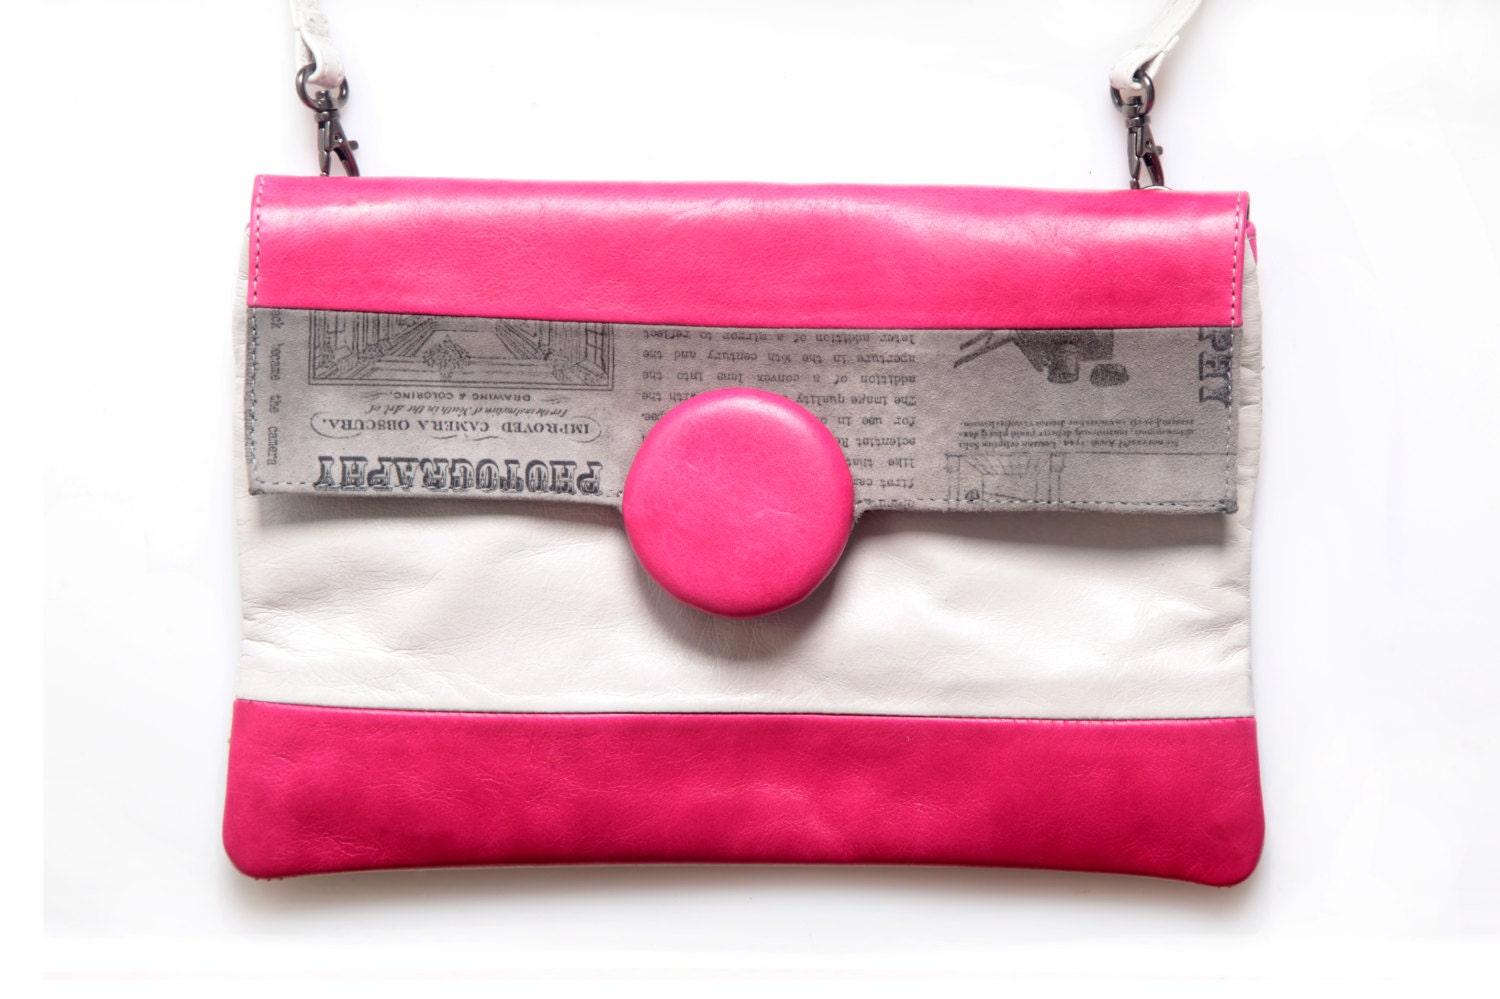 Pink Clutch Bag Pink Leather Clutch Pink Leather Bag Small